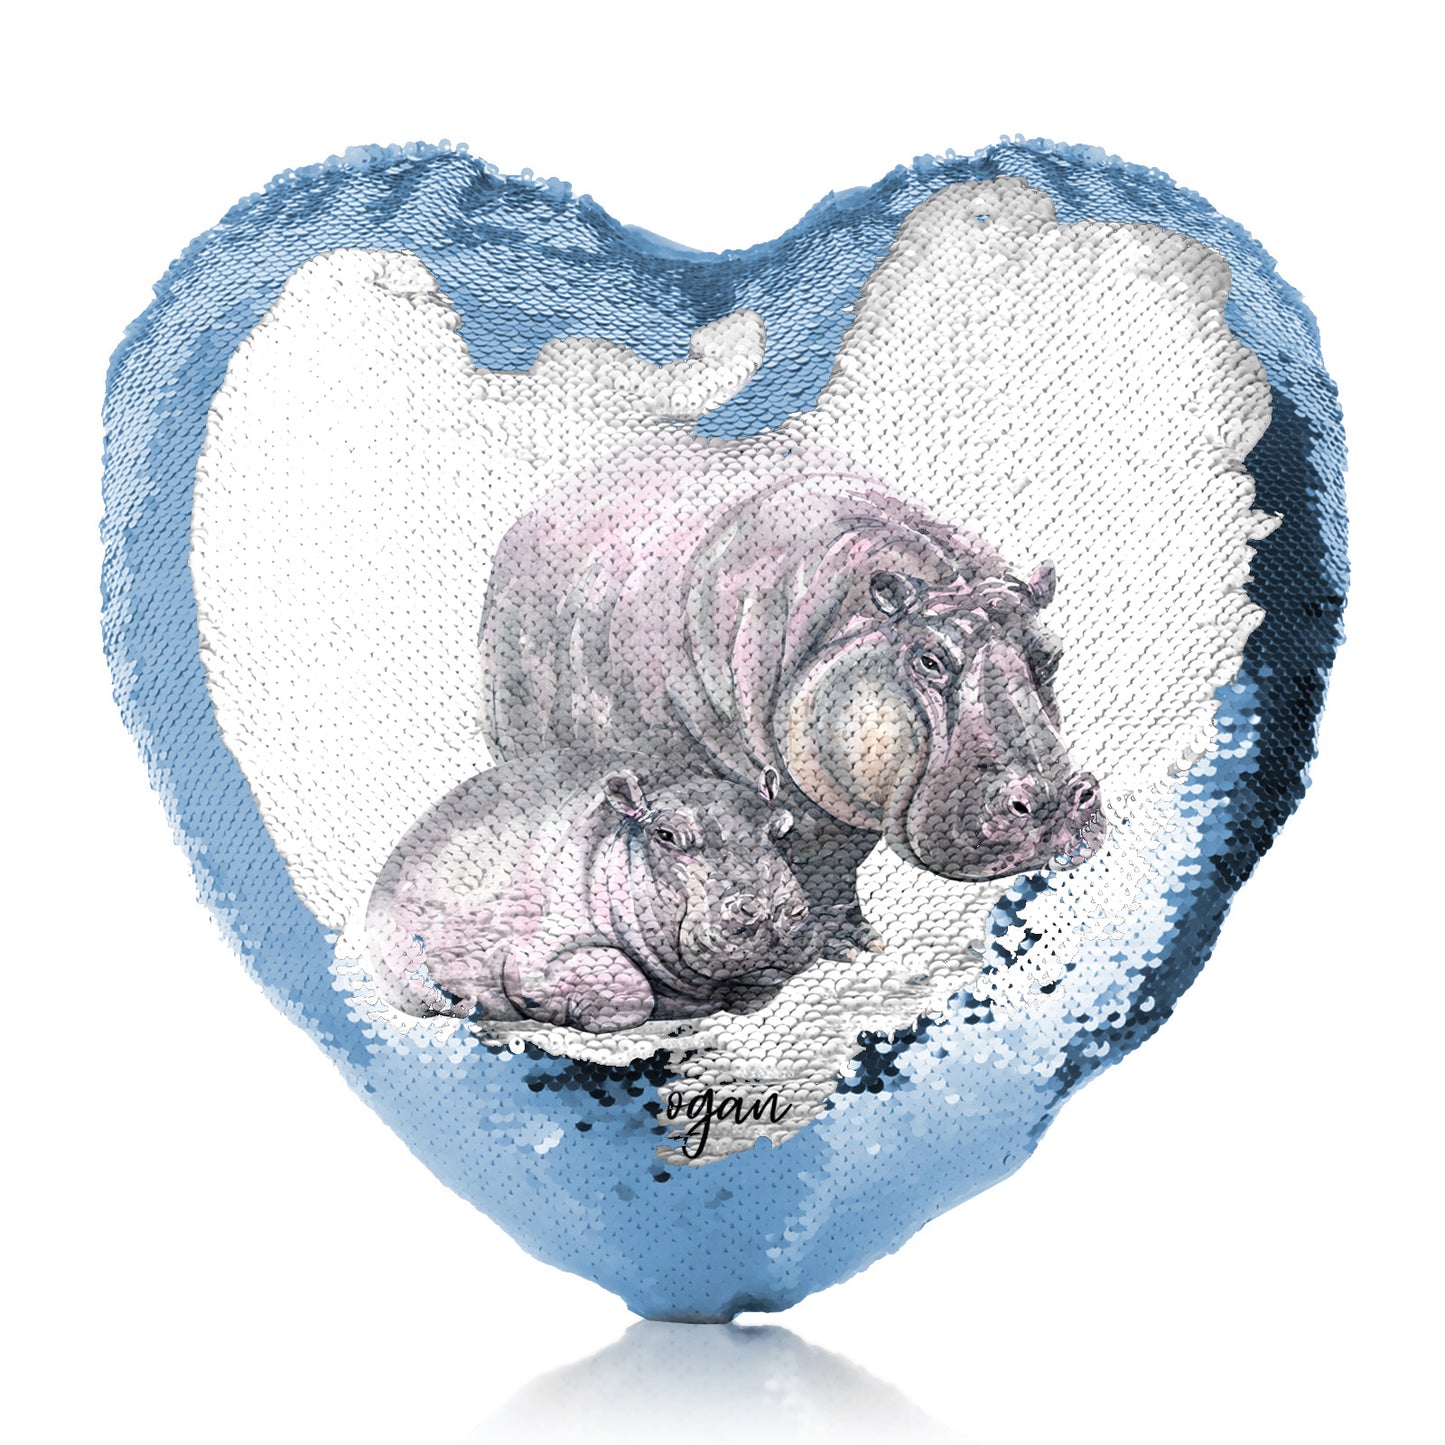 Personalised Sequin Heart Cushion with Welcoming Text and Relaxing Mum and Baby Hippos